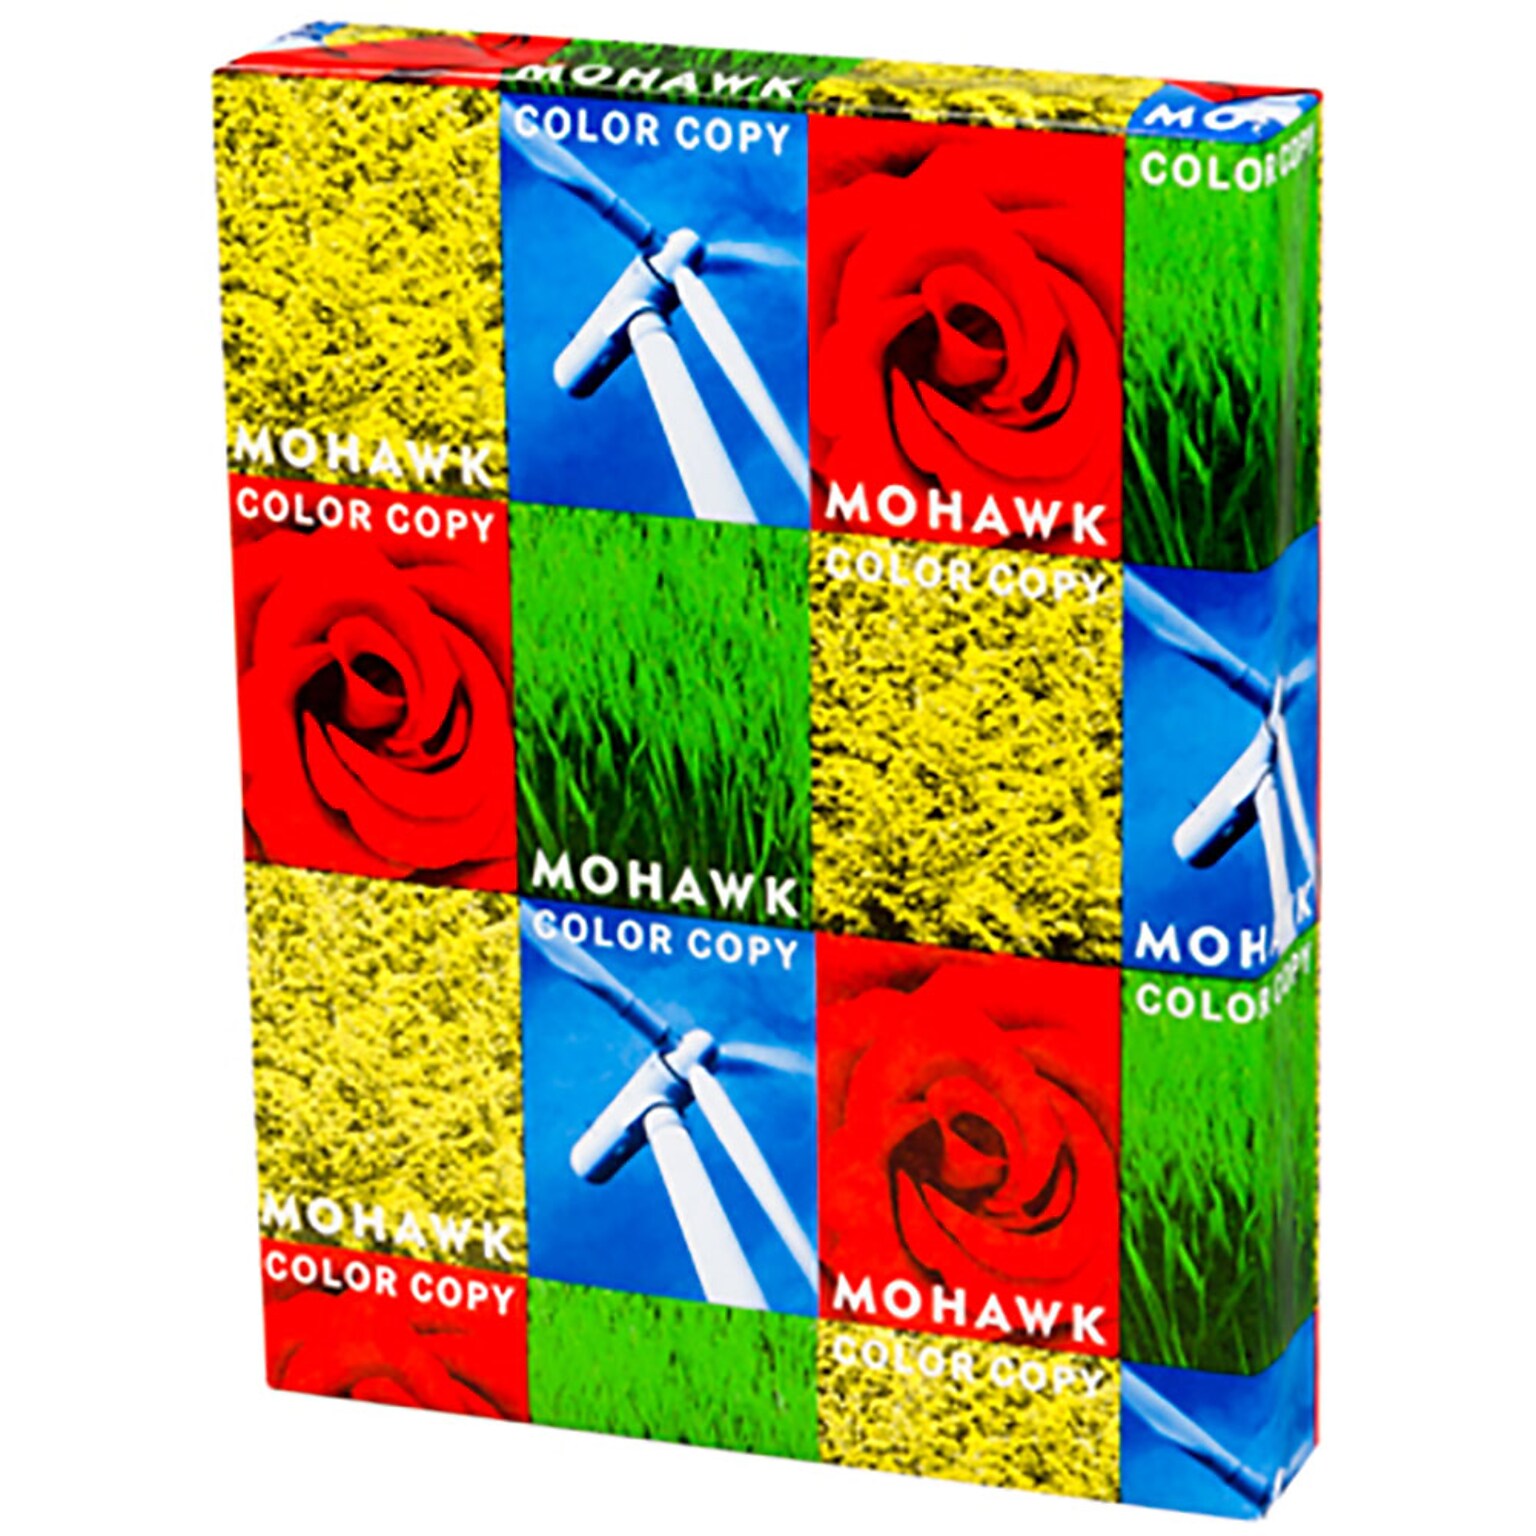 Mohawk® Color Copy 98 12 x 18 Smooth Imaging Paper, 28 lbs., 100 Brightness, 500/Ream (54-303)